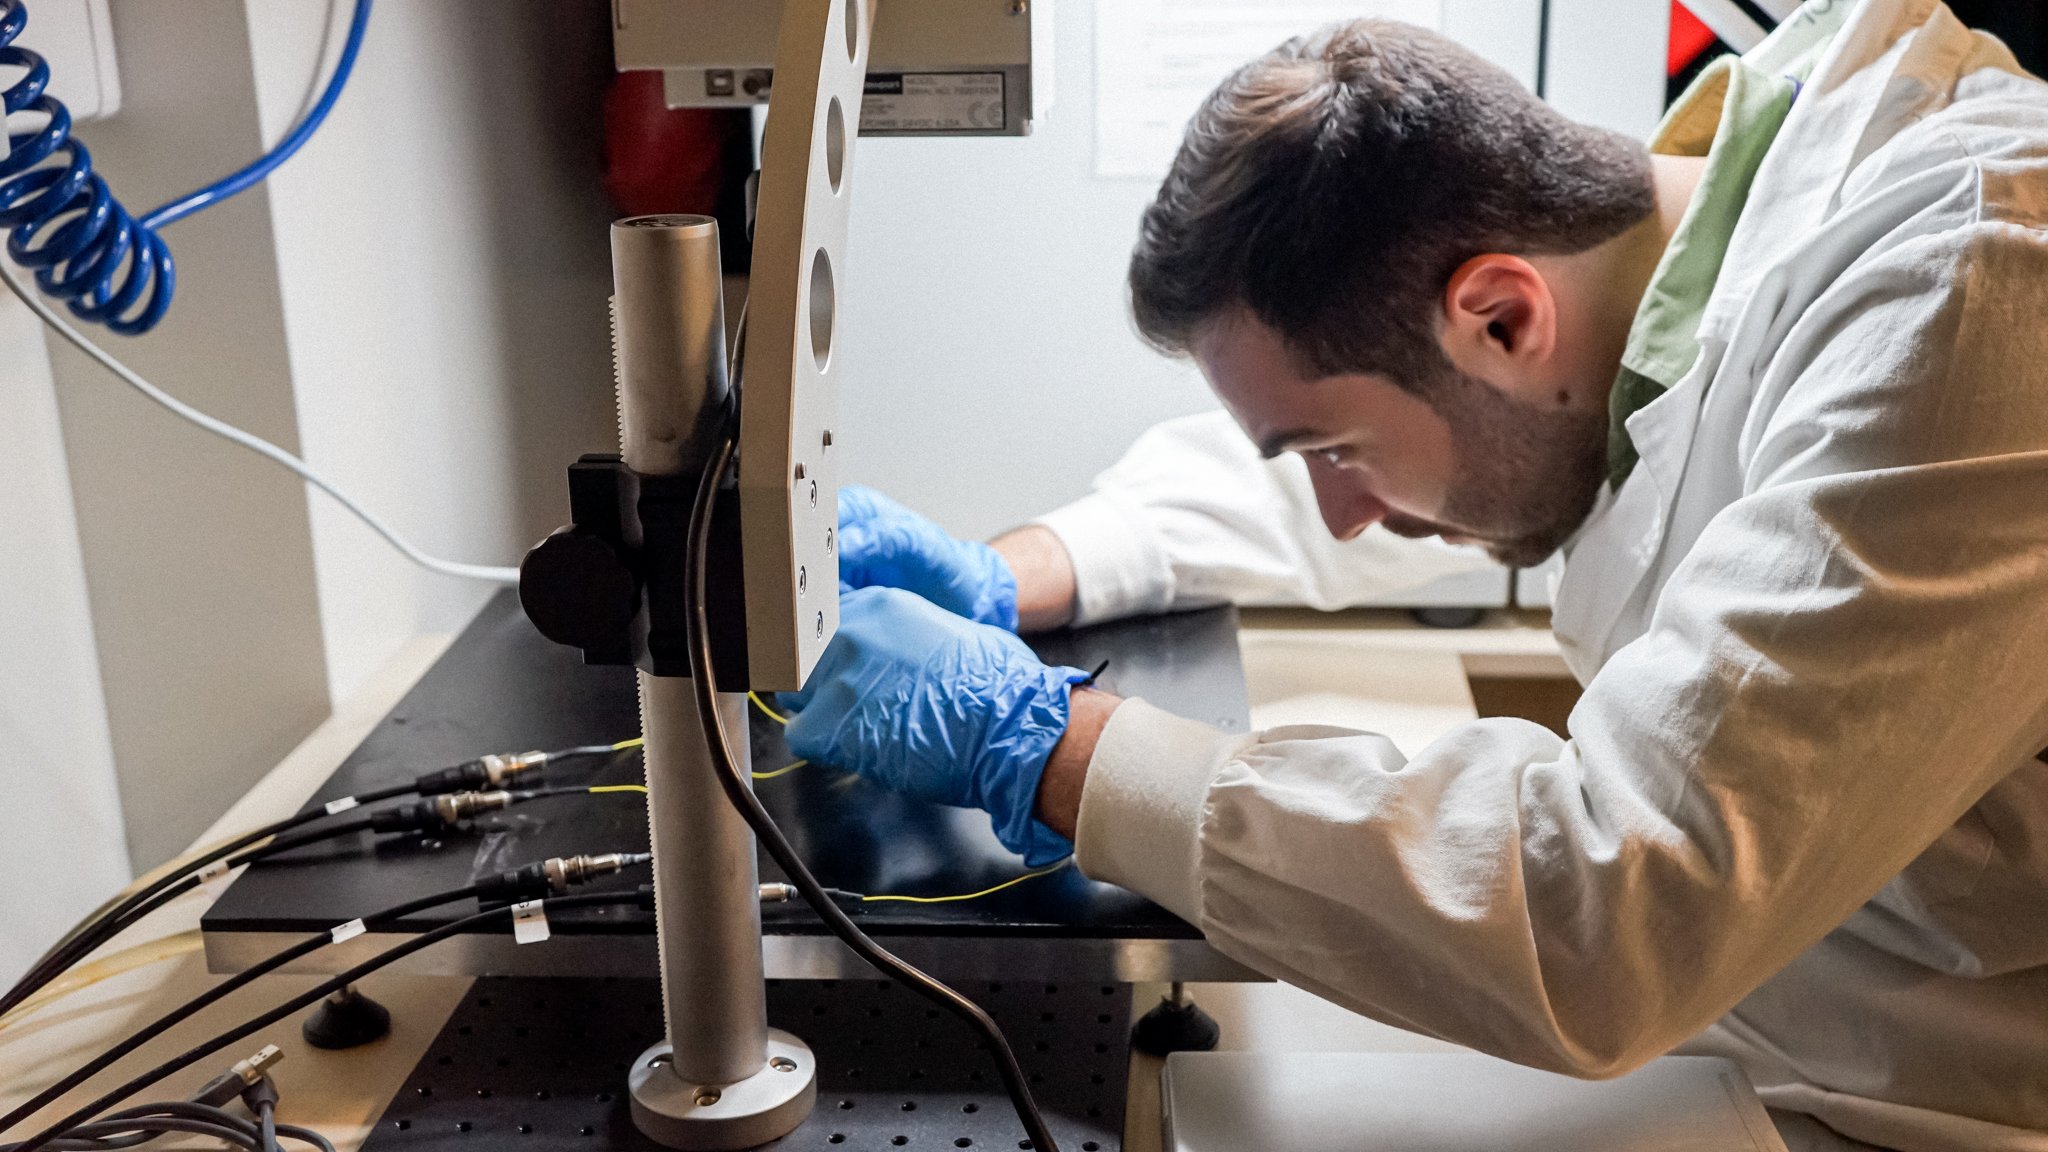 Meet António Oliveira, the latest Fulbright awardee working at INL